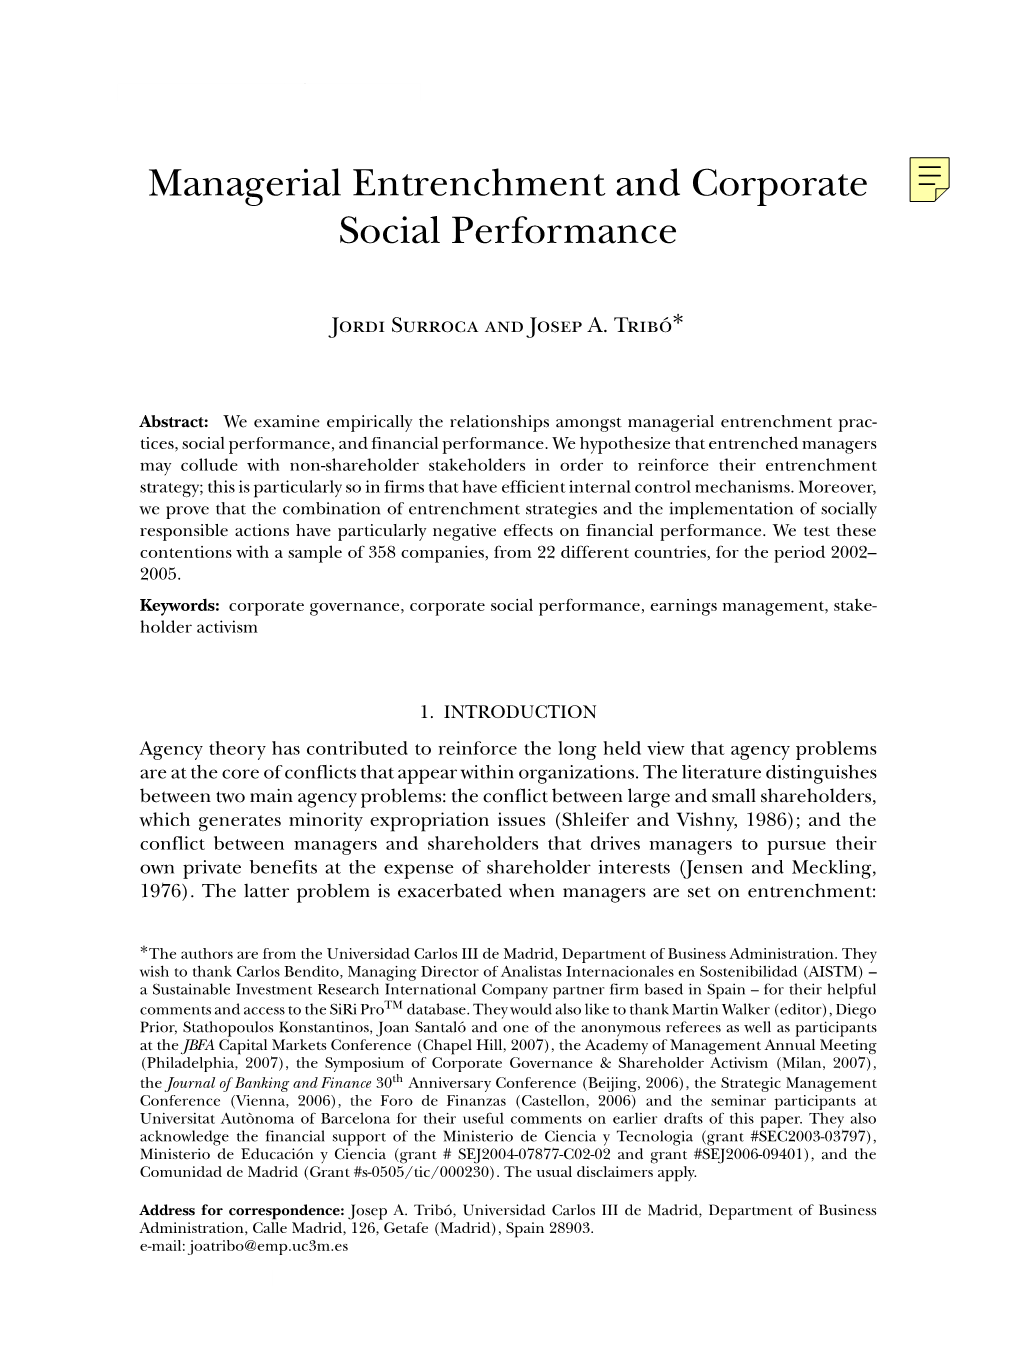 Managerial Entrenchment and Corporate Social Performance